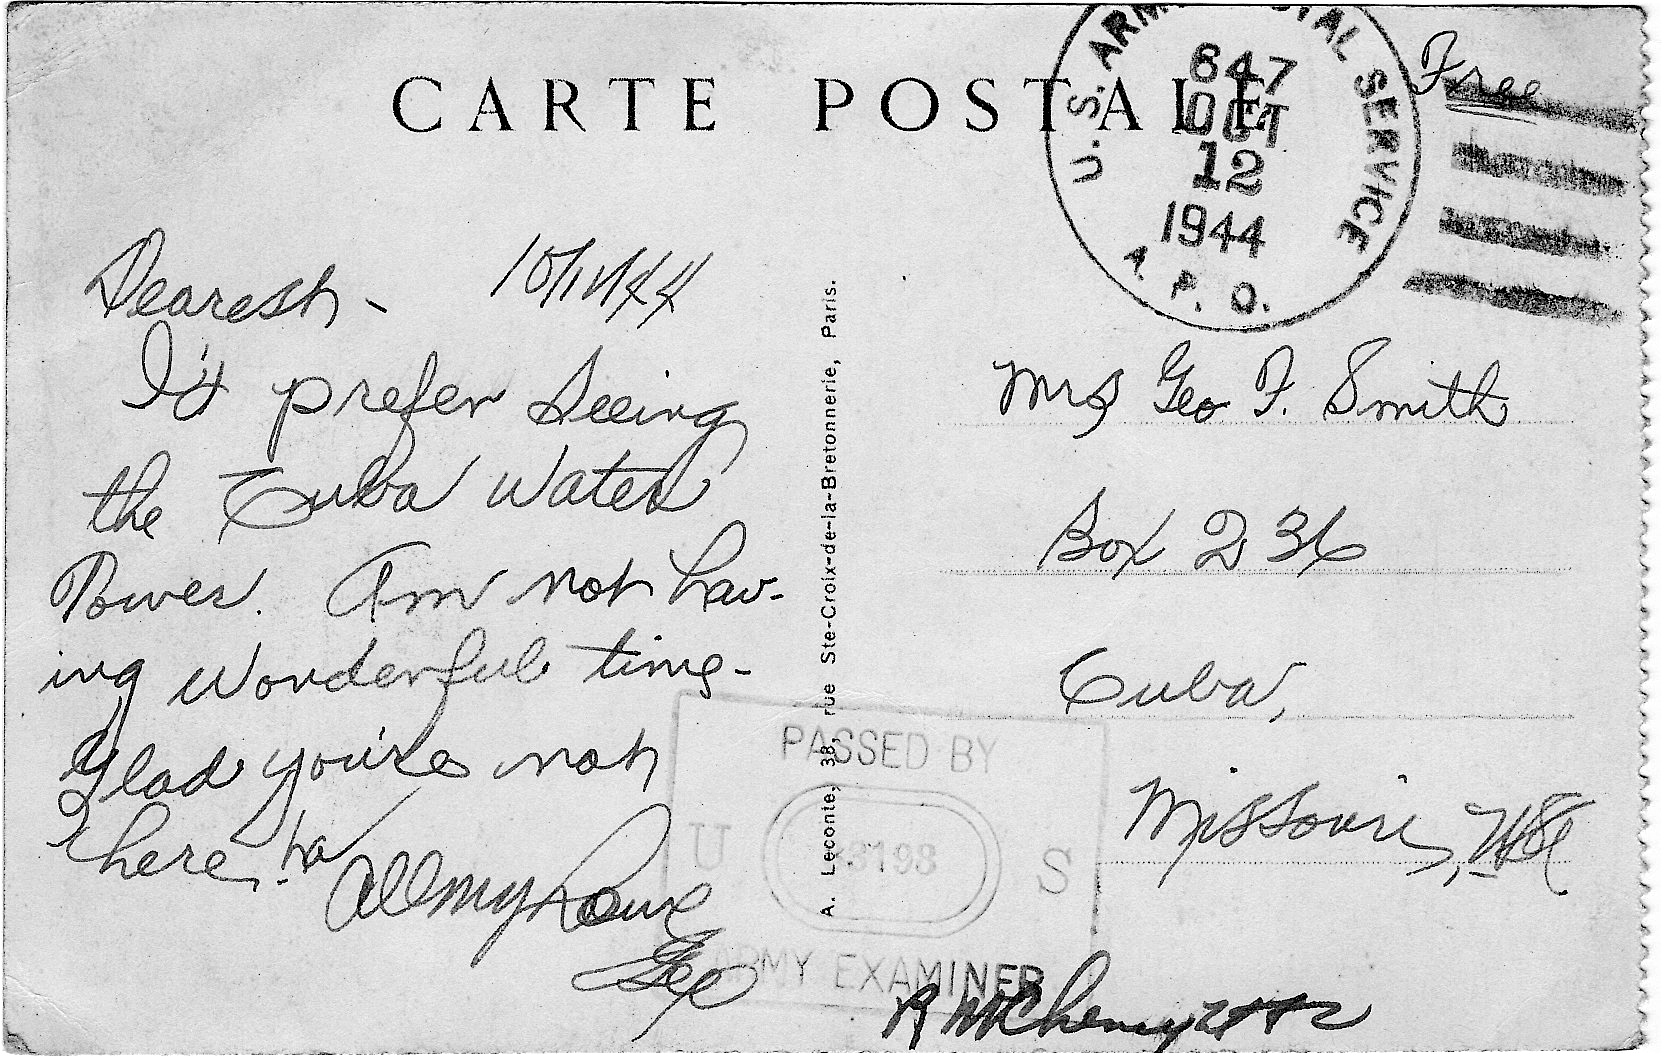 WWII Postcard from Paris, France